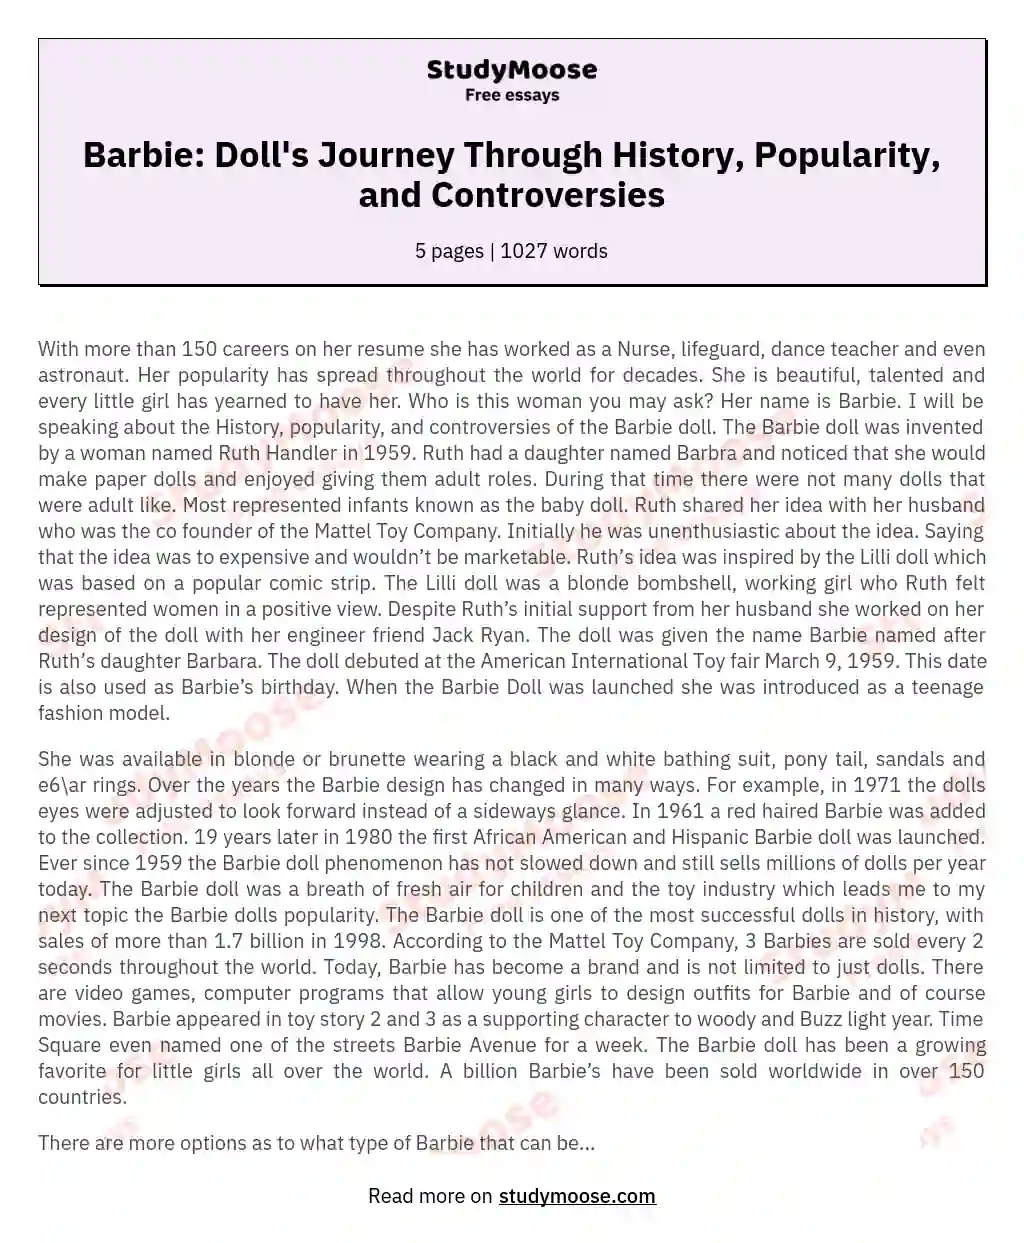 Barbie: Doll's Journey Through History, Popularity, and Controversies essay